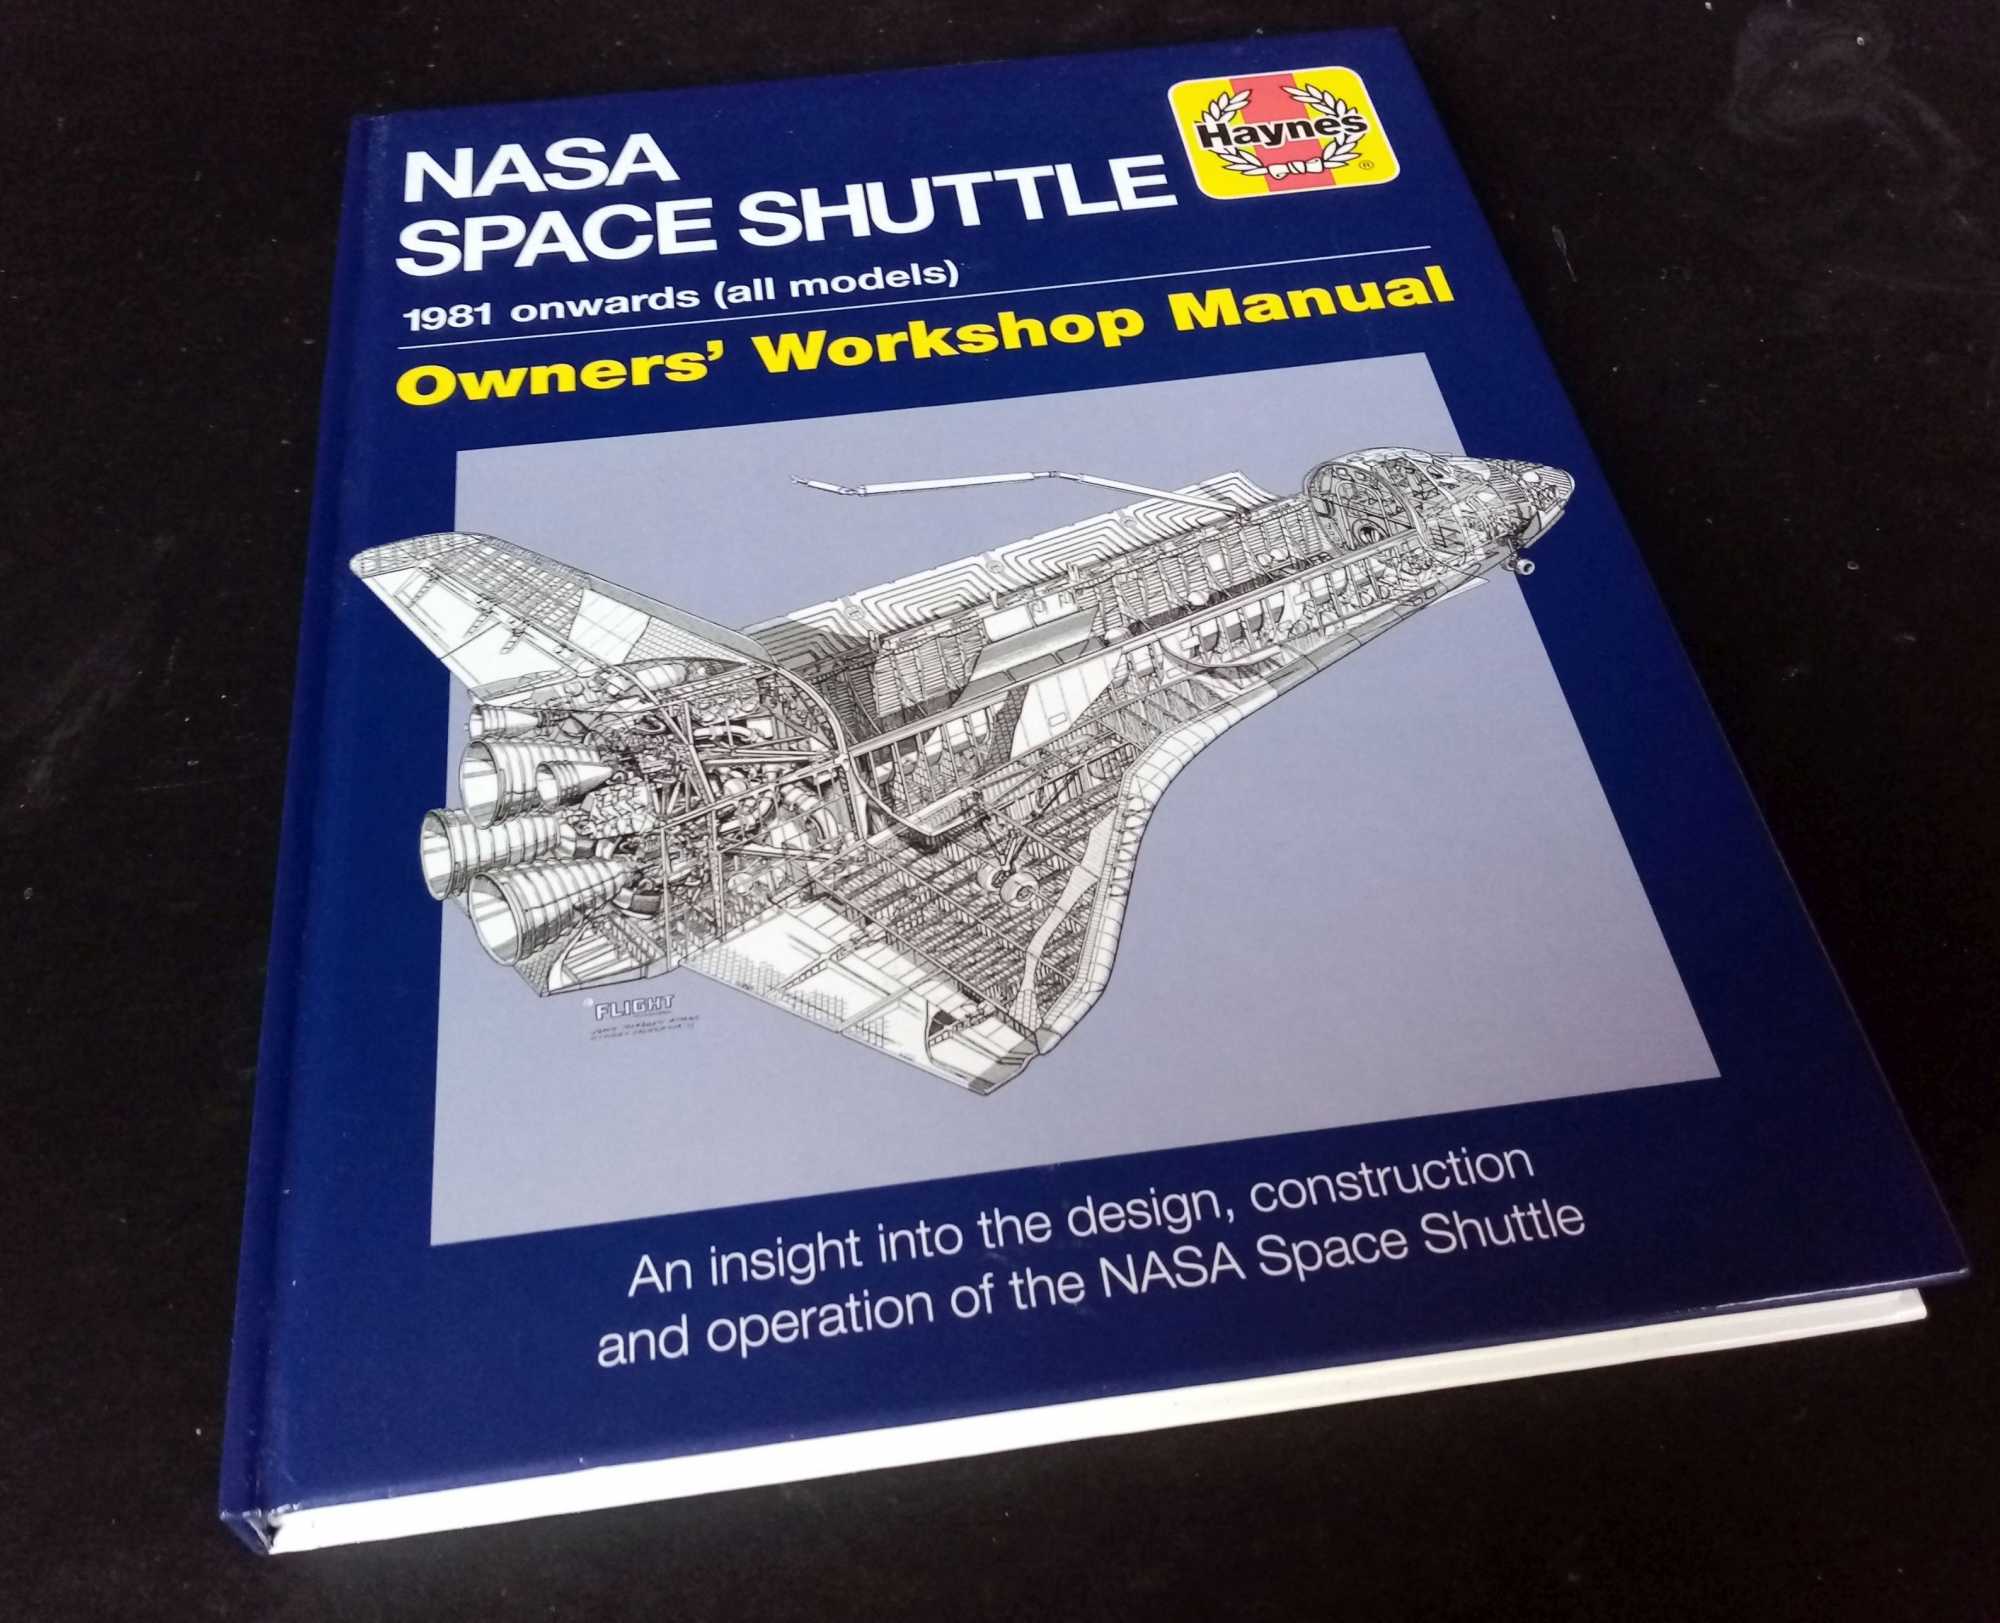 David Baker - NASA Space Shuttle Manual: An Insight Into the Design, Construction and Operation of the NASA Space Shuttle (Owner's Workshop Manual)